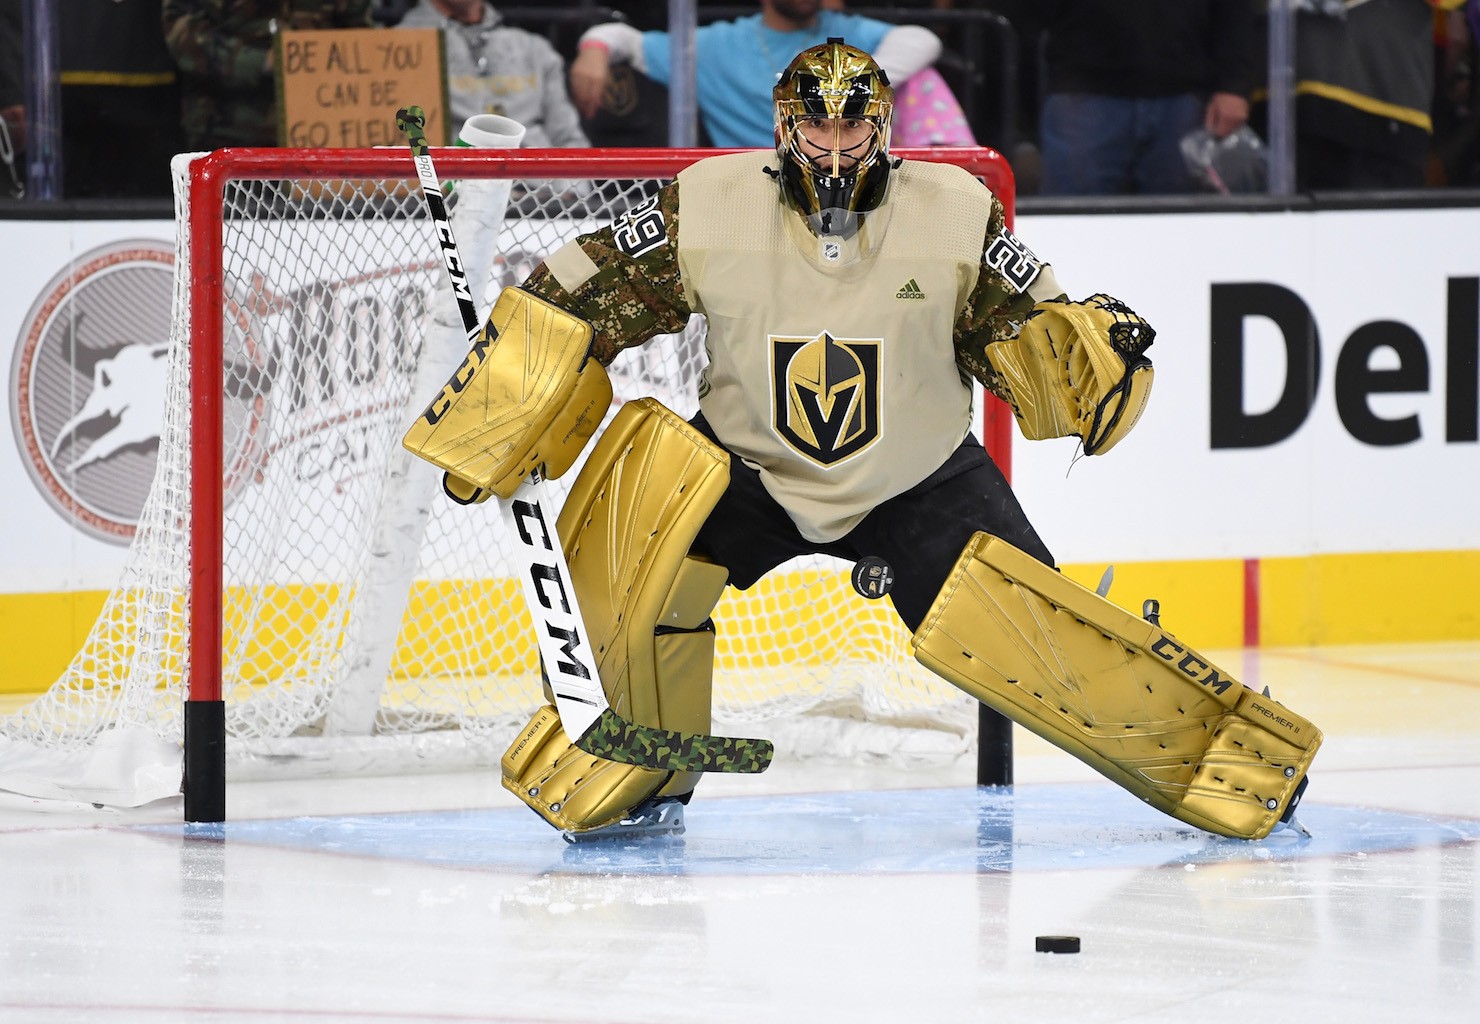 NEW Imports Dragon Marc-André Fleury 6-inch Figure (Gold Pads)